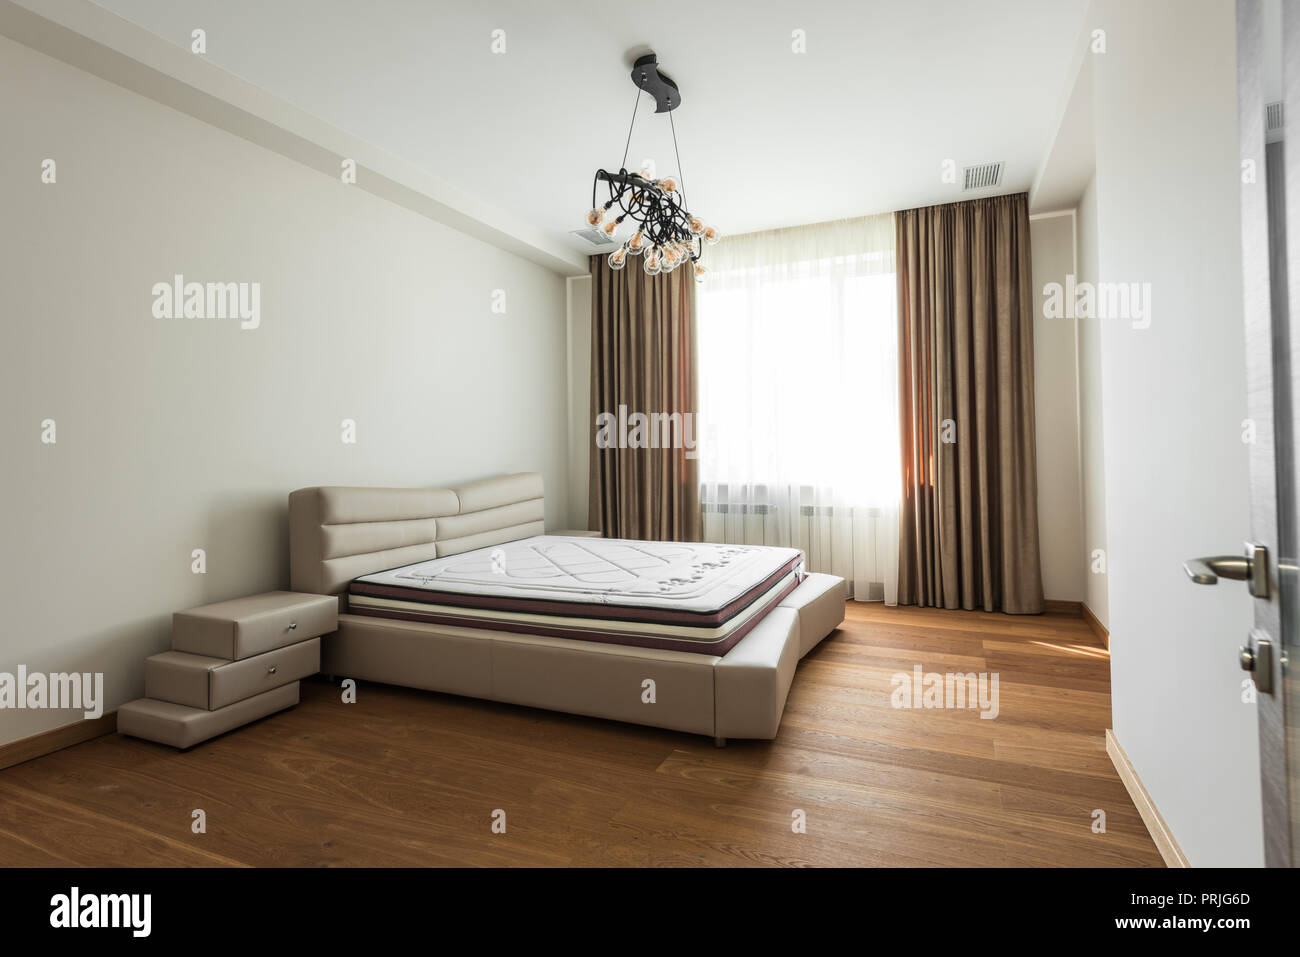 interior of empty bedroom with big window and mattress on bed Stock Photo